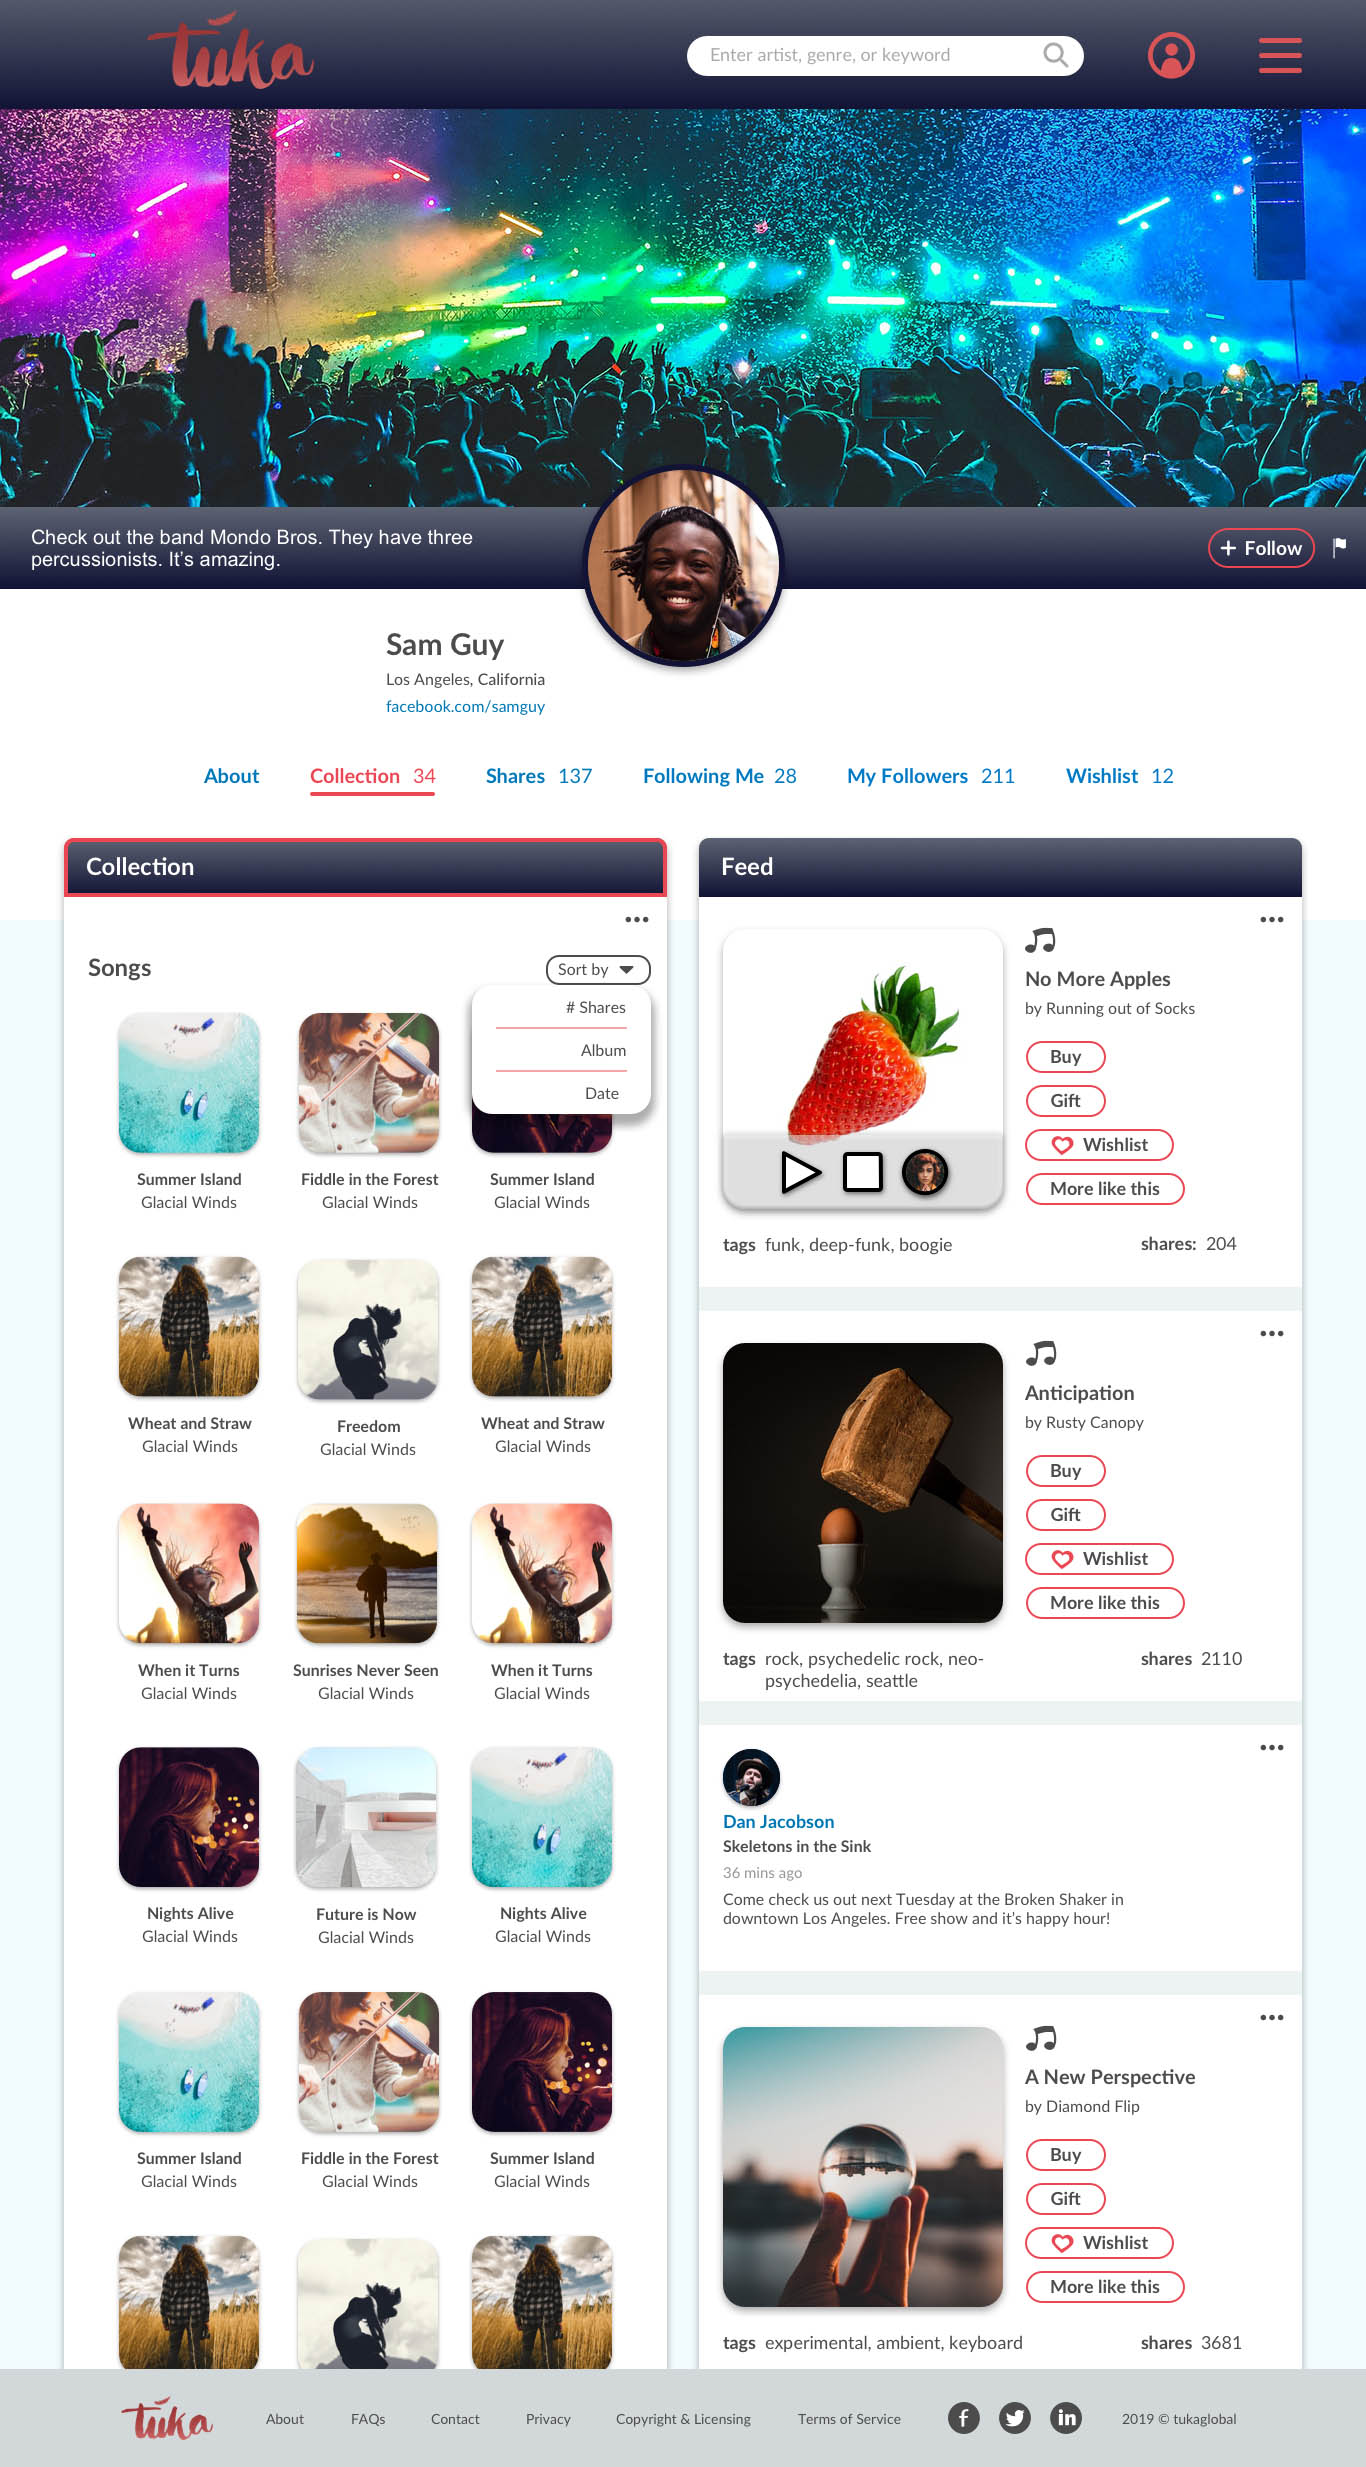 Content creator page